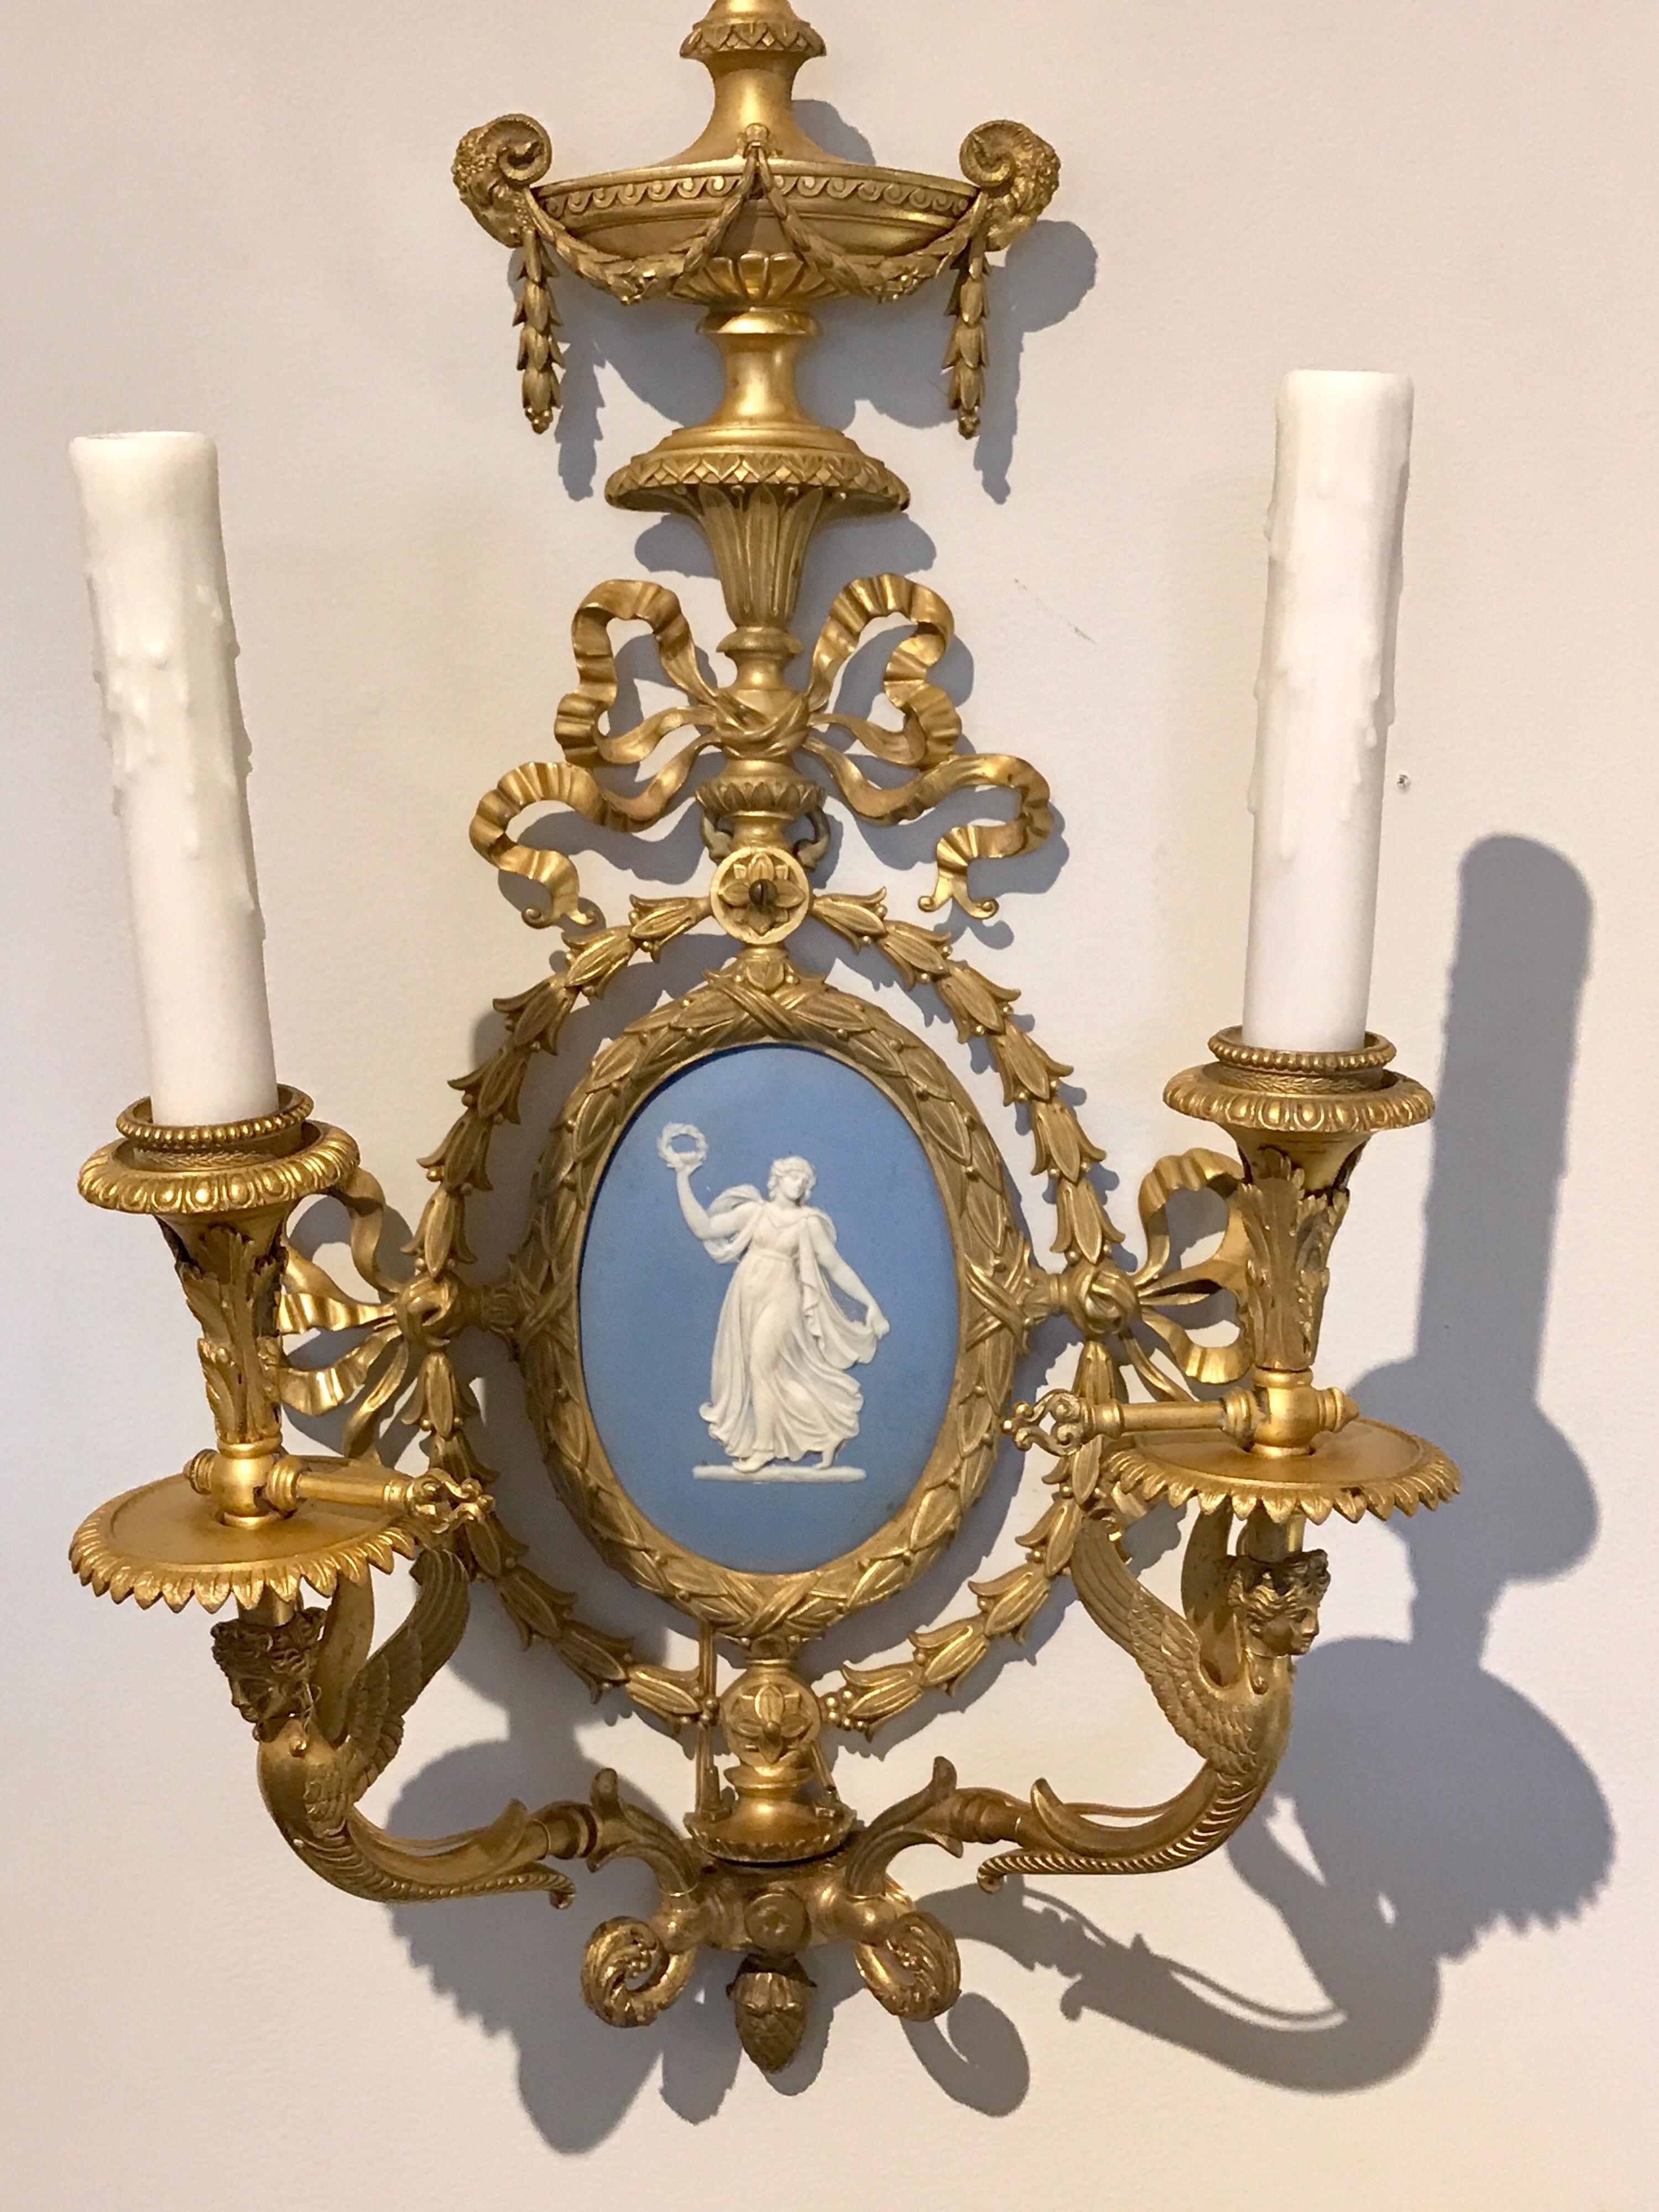 Pair of Exquisite Adam Style Ormolu Wall Sconces with Wedgwood Plaques For Sale 4